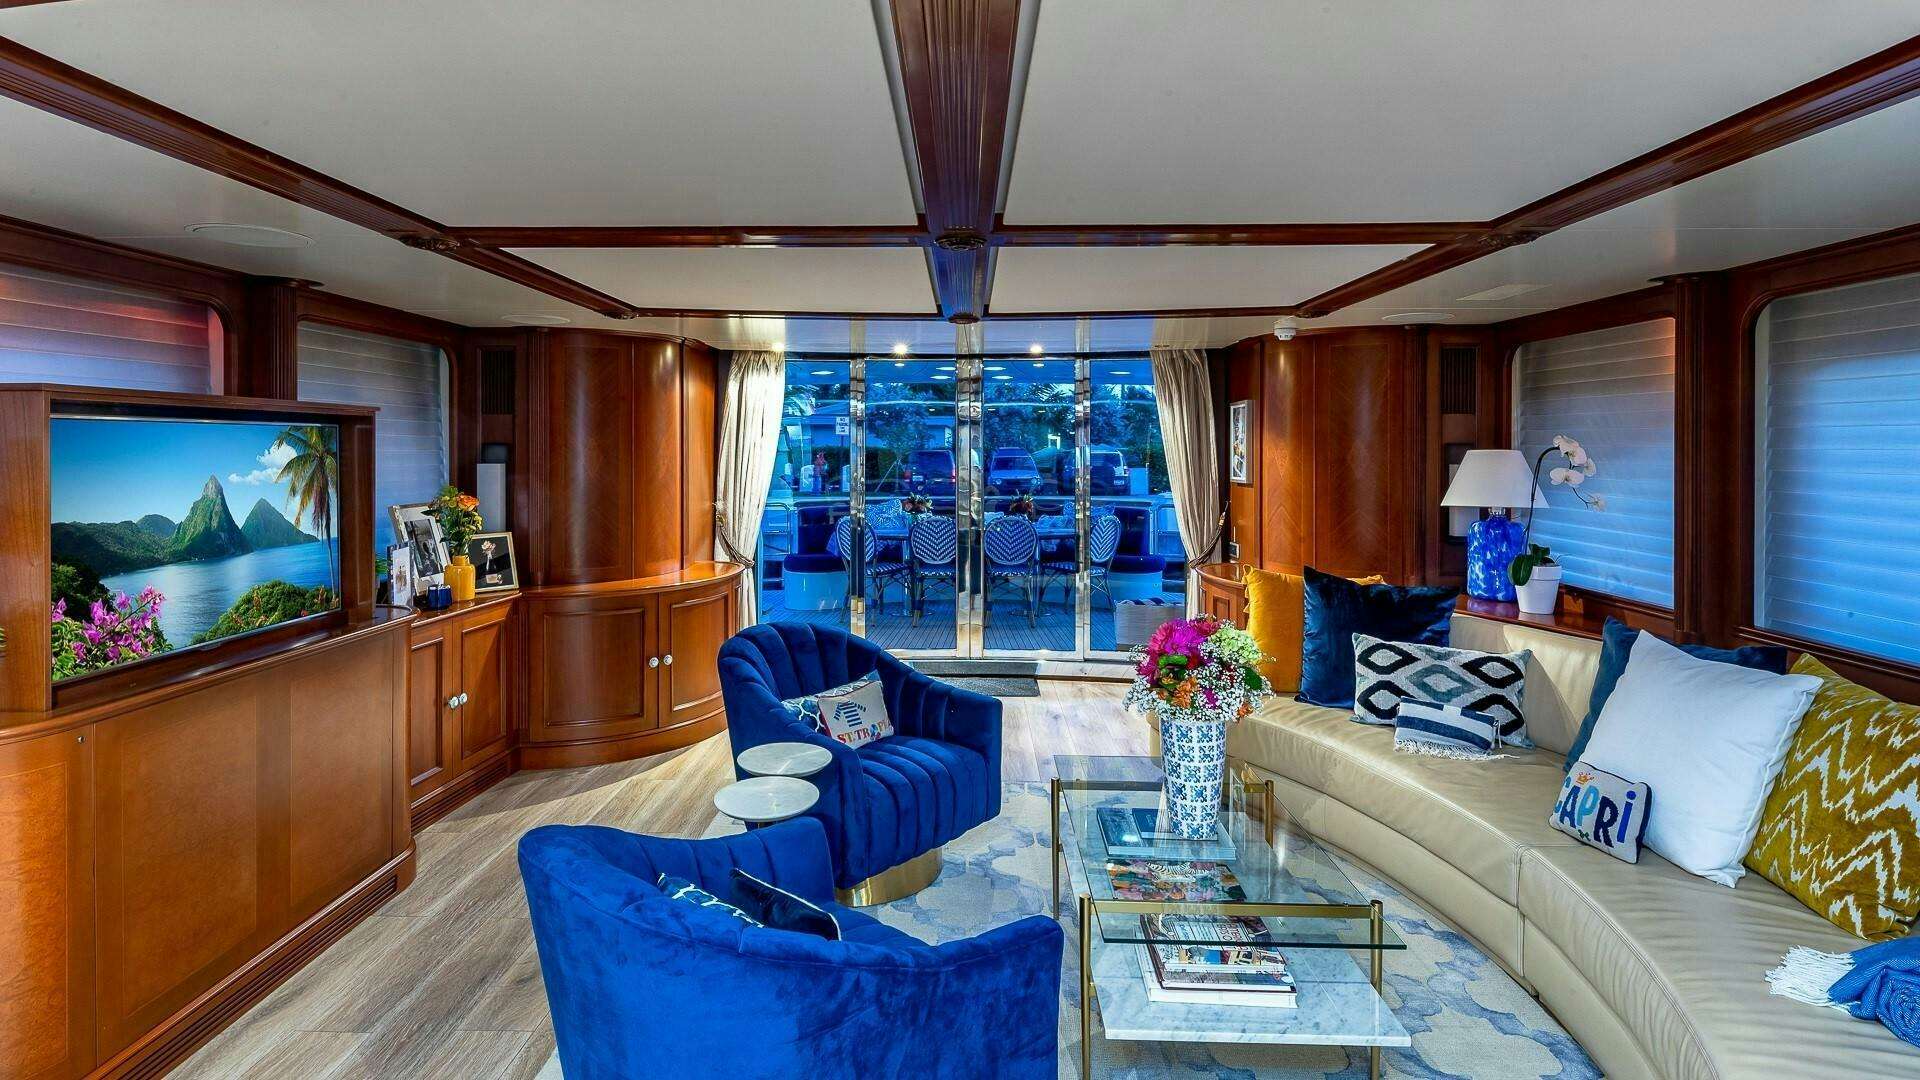 Pour another
Yacht for Sale